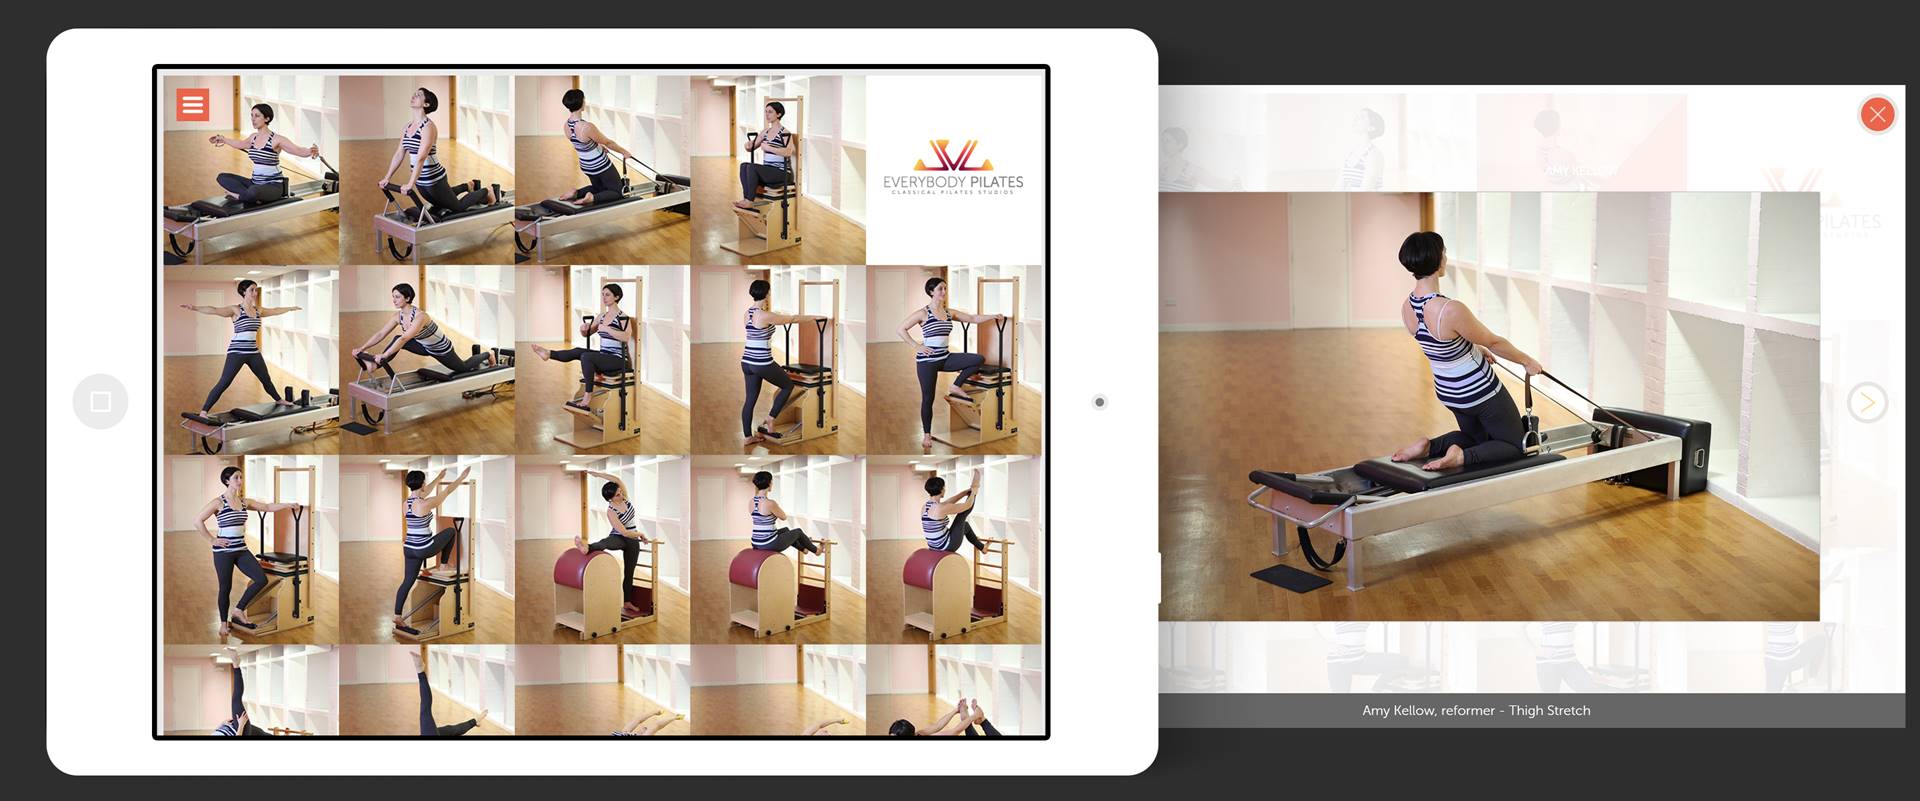 Responsive interactive website for Everybody Pilates built by Hussein Khraibani